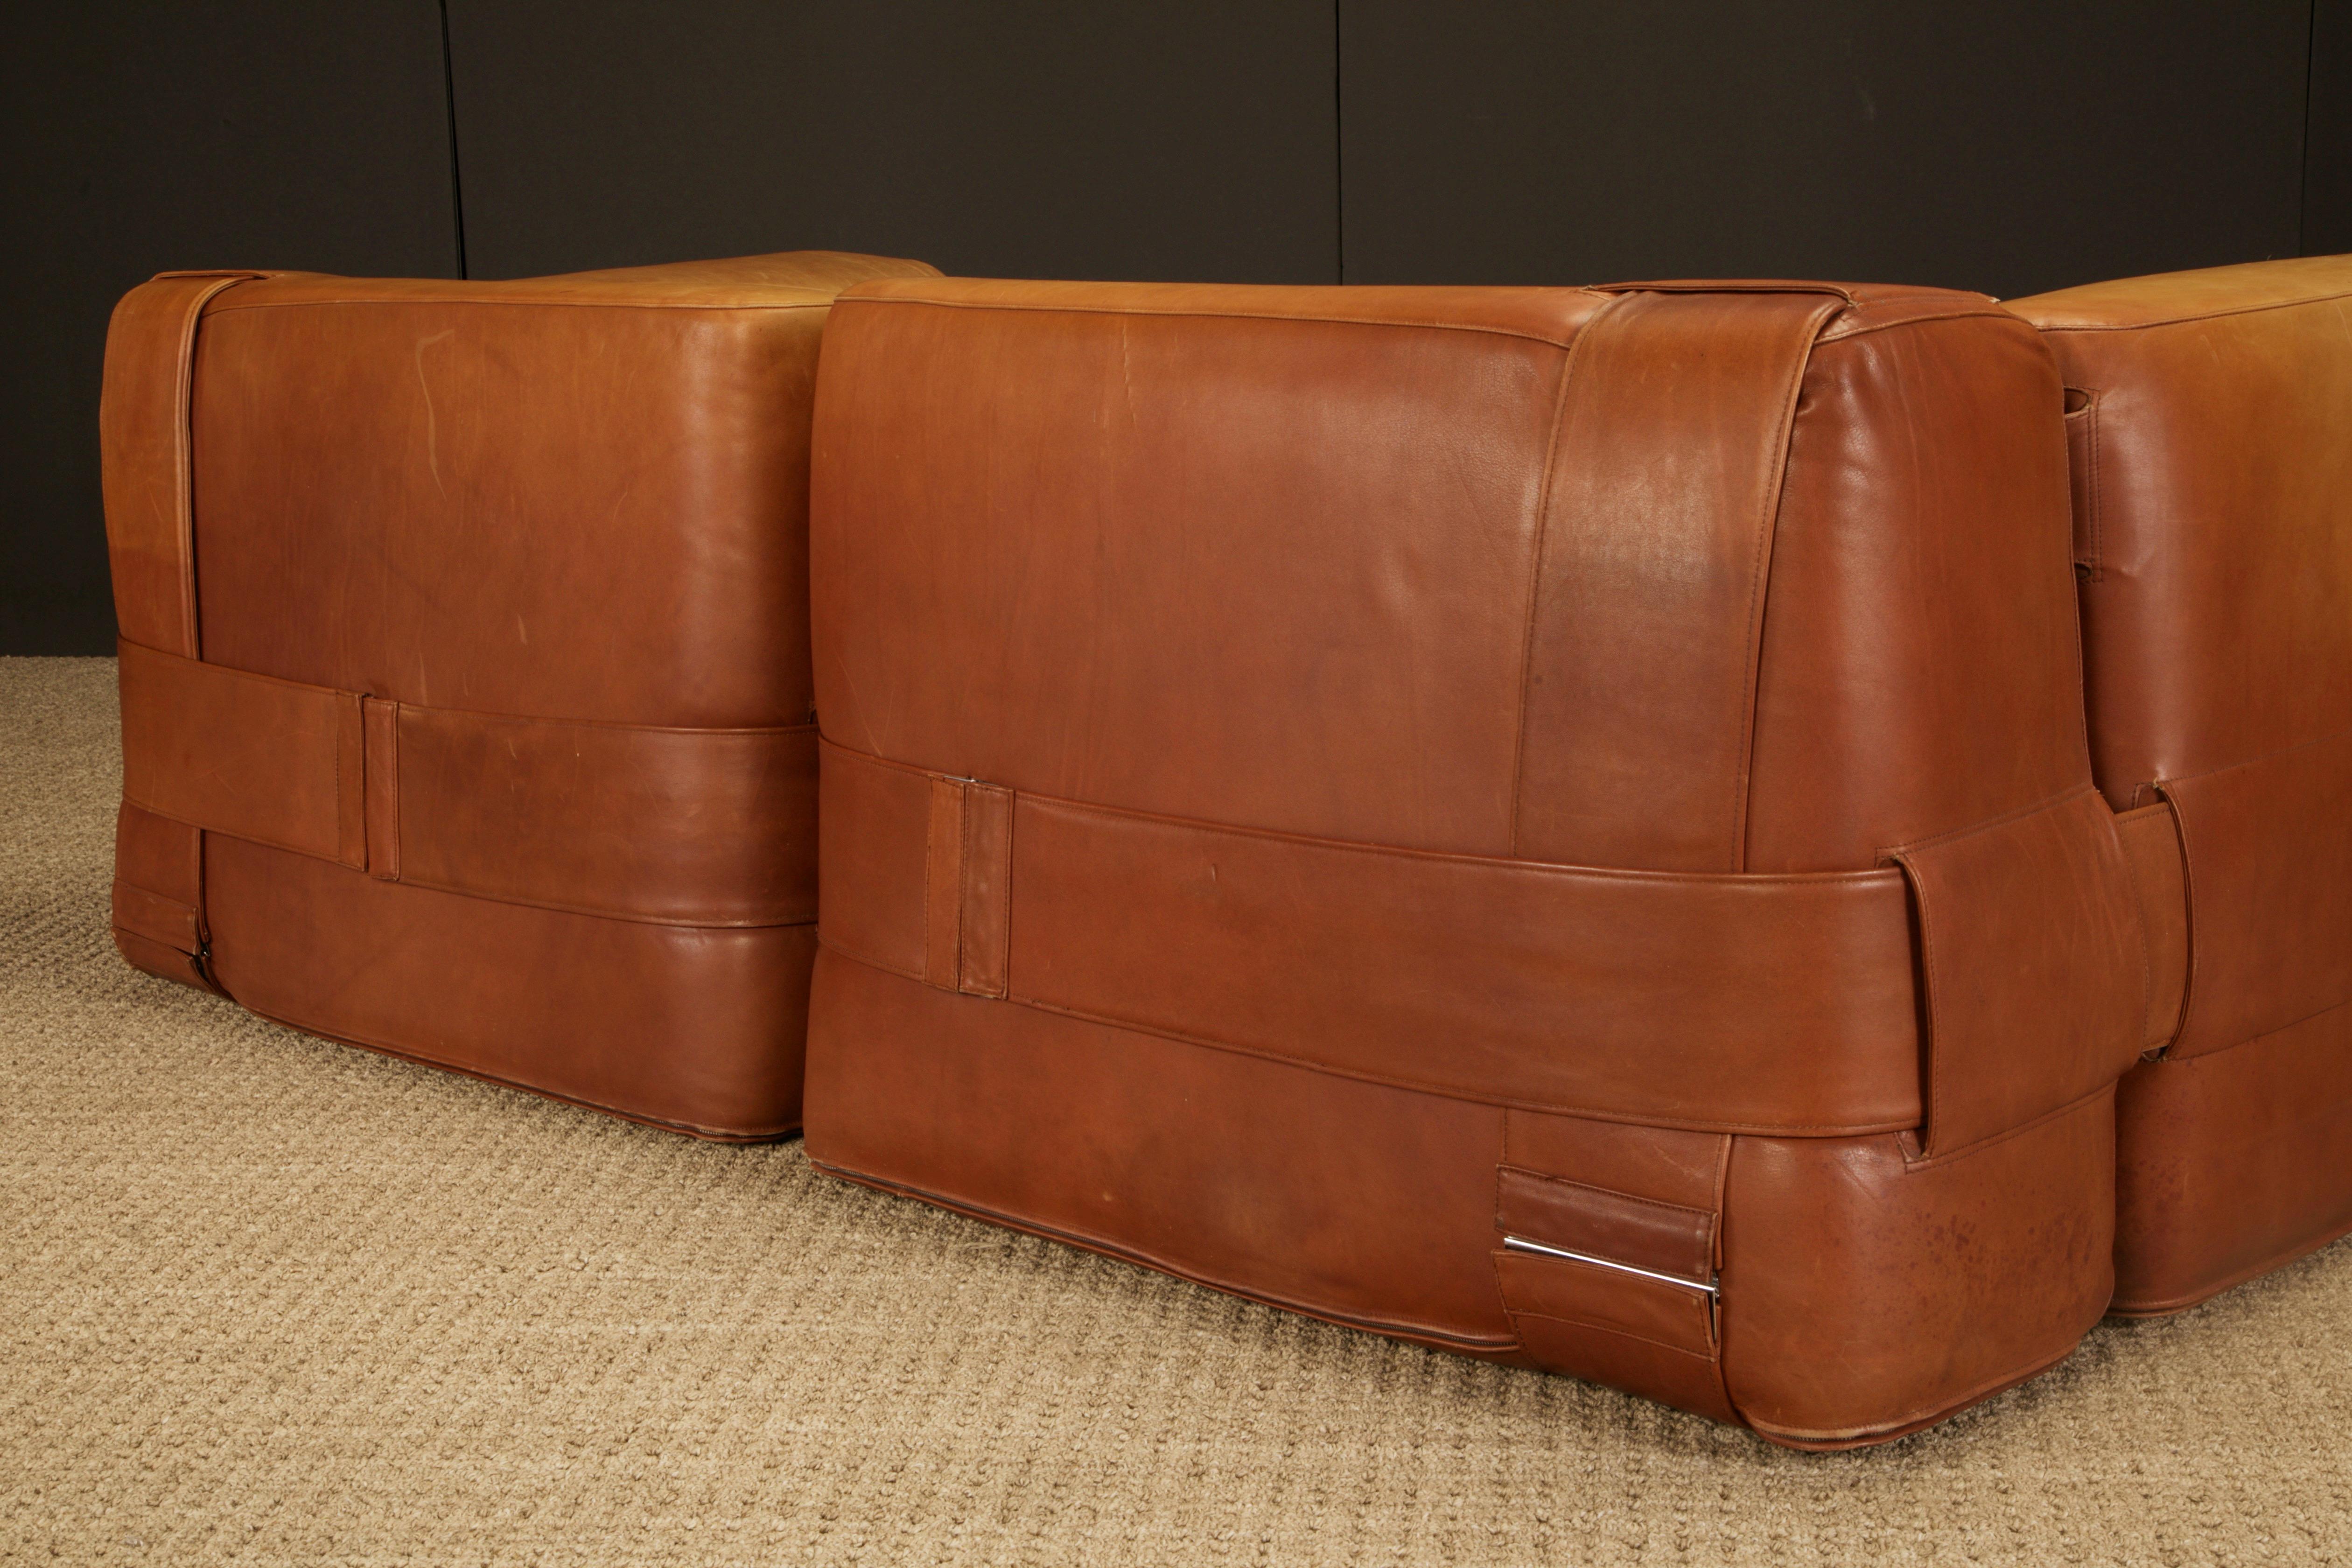 Original 932-Quartet Leather Sectional Sofa by Mario Bellini for Cassina, 1964 For Sale 12